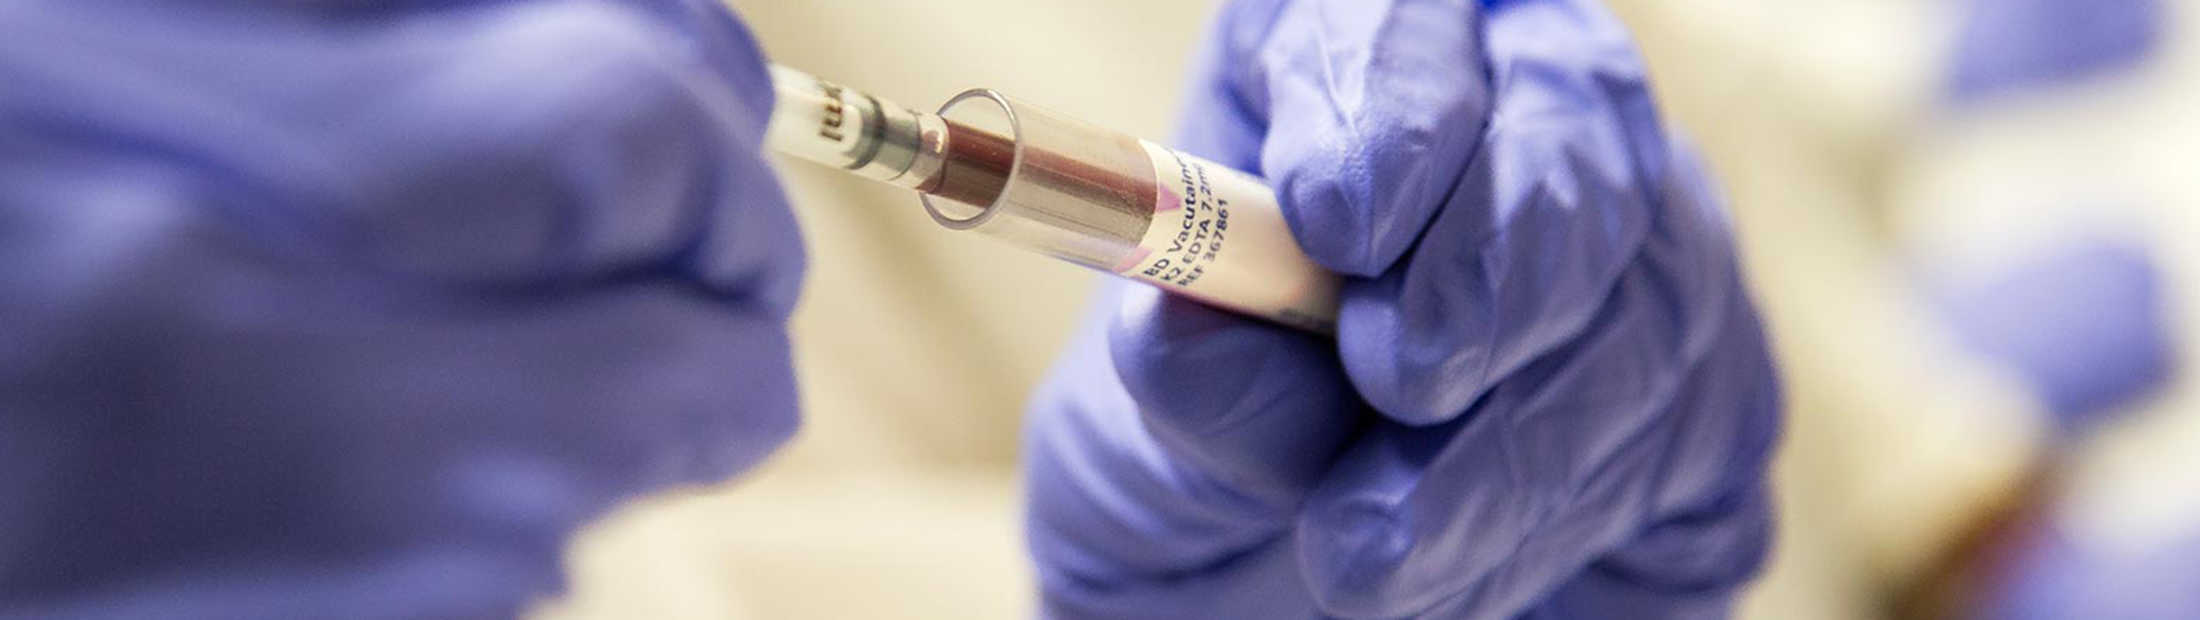 A person pipetting blood into a vial.